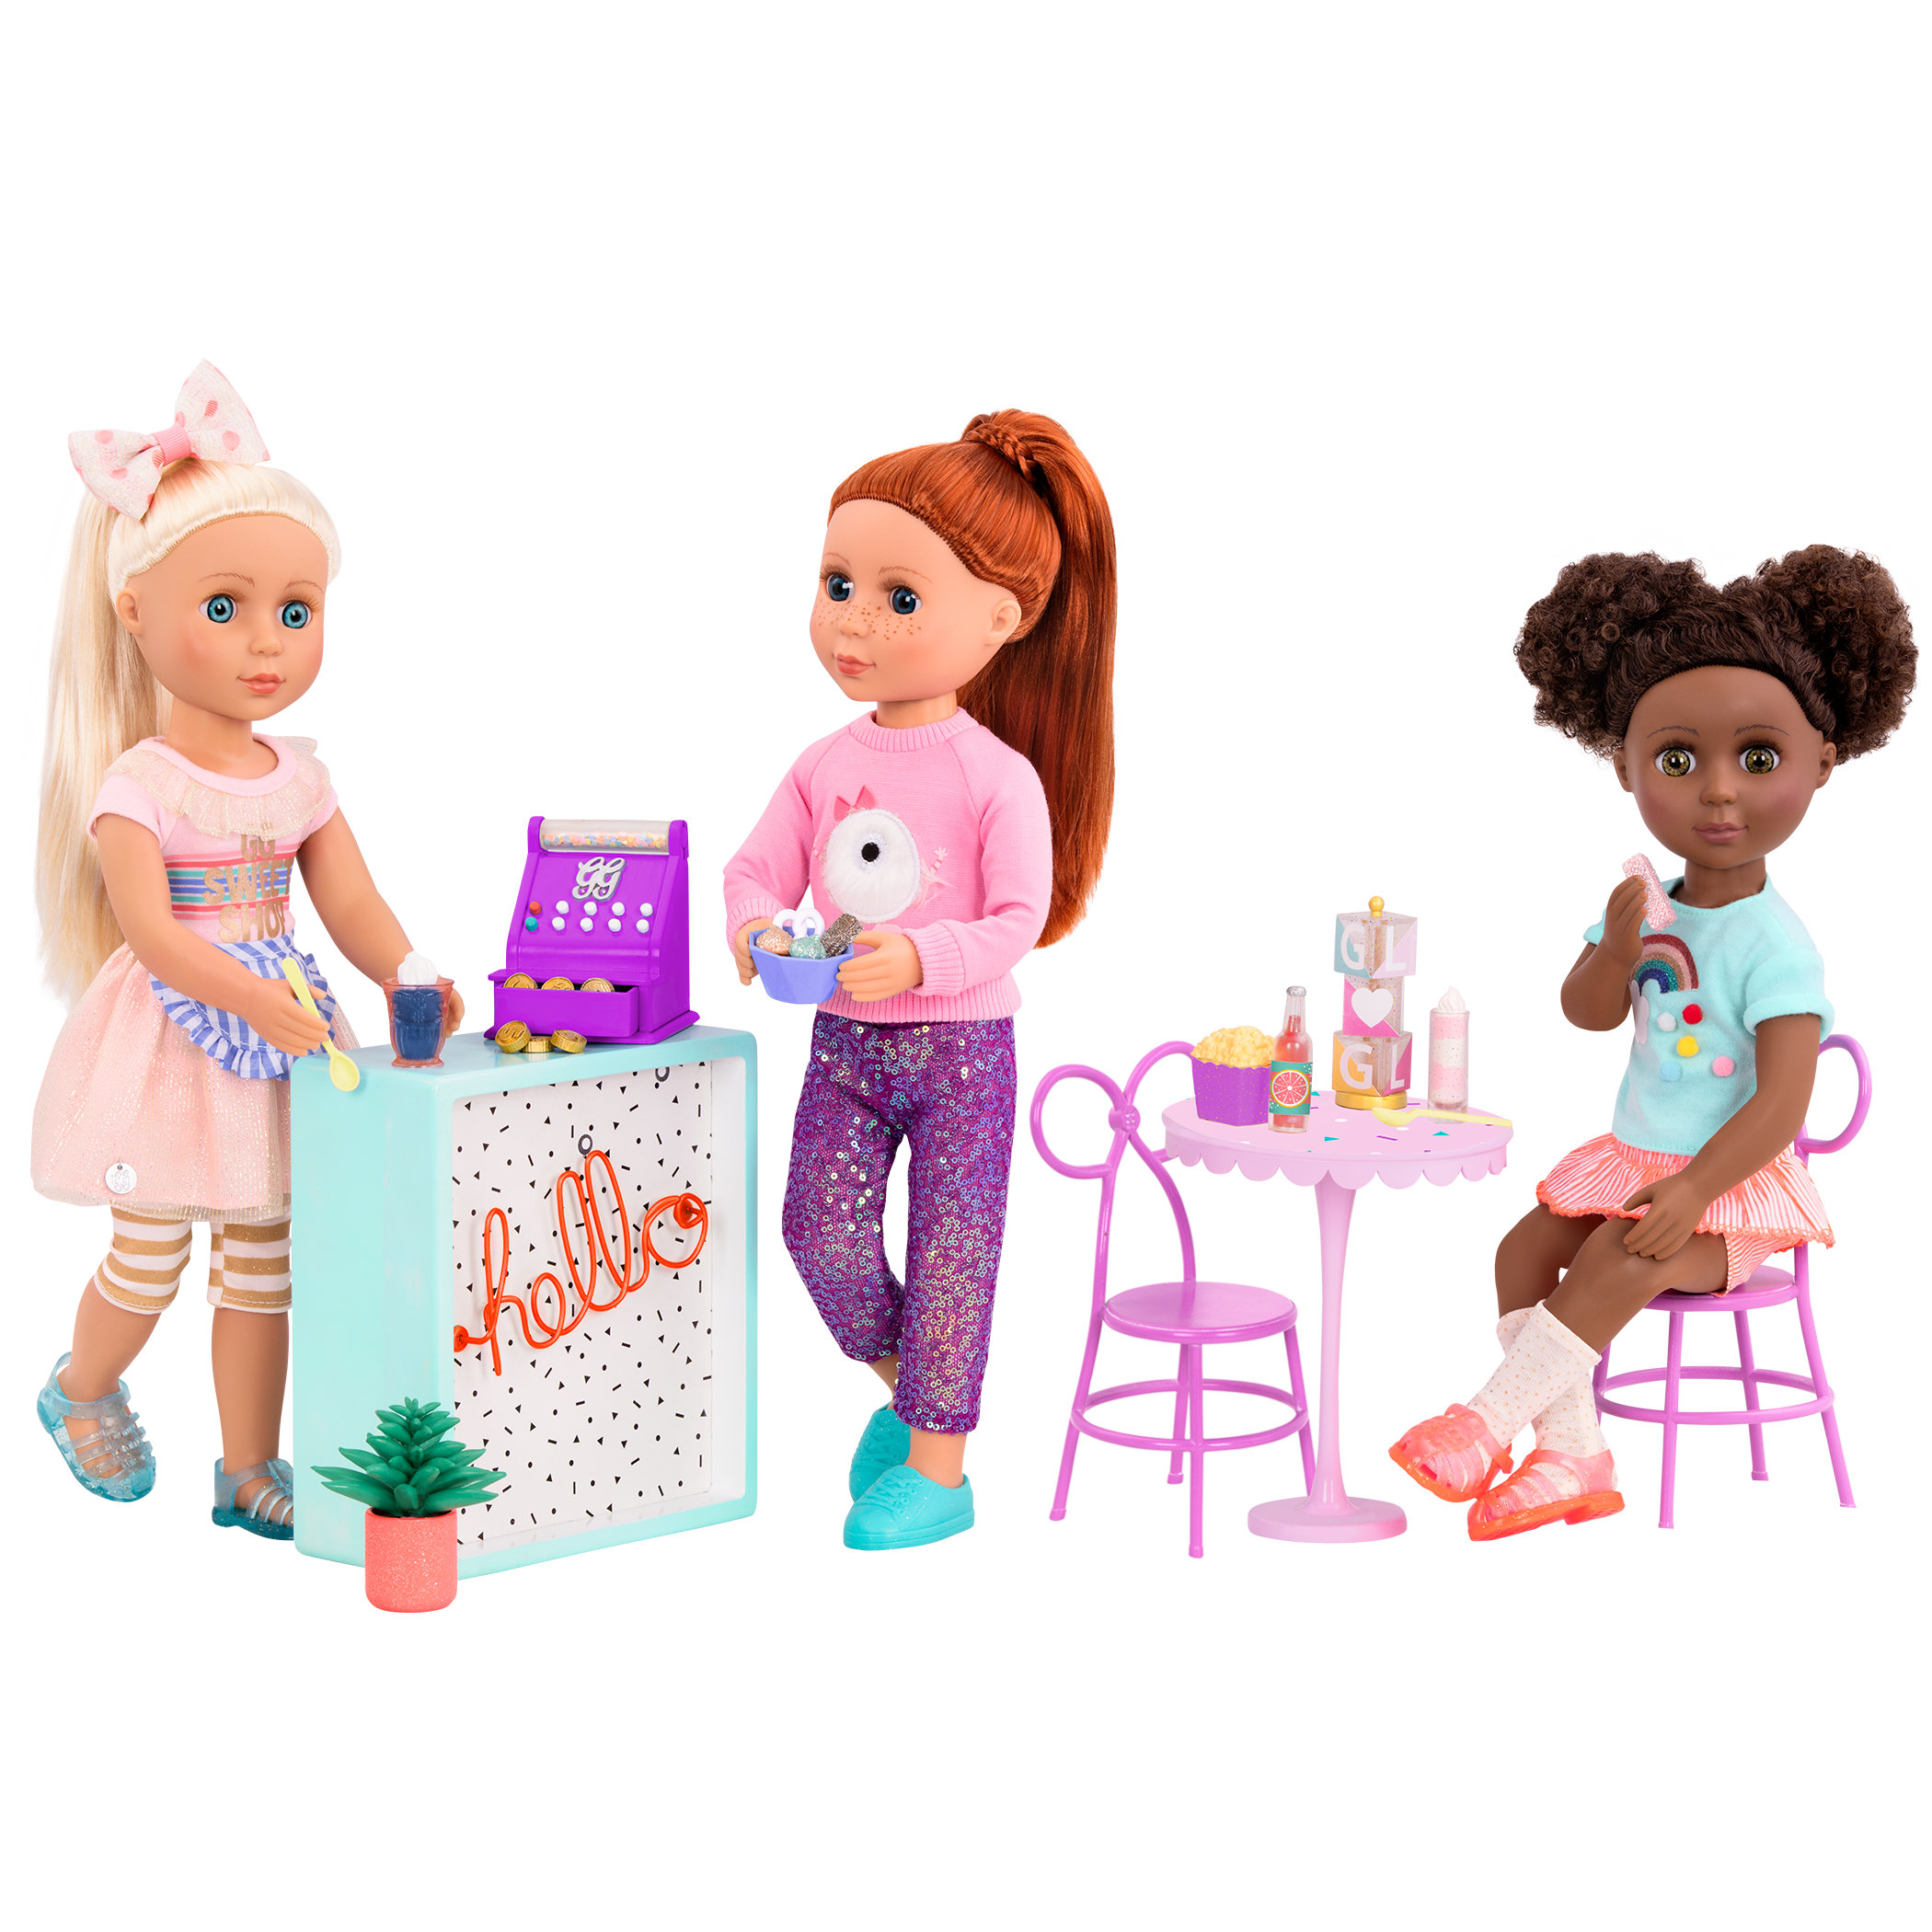 Glitter Girls by Battat Toy Store House and for 3 GG Sweet Shop Playset 